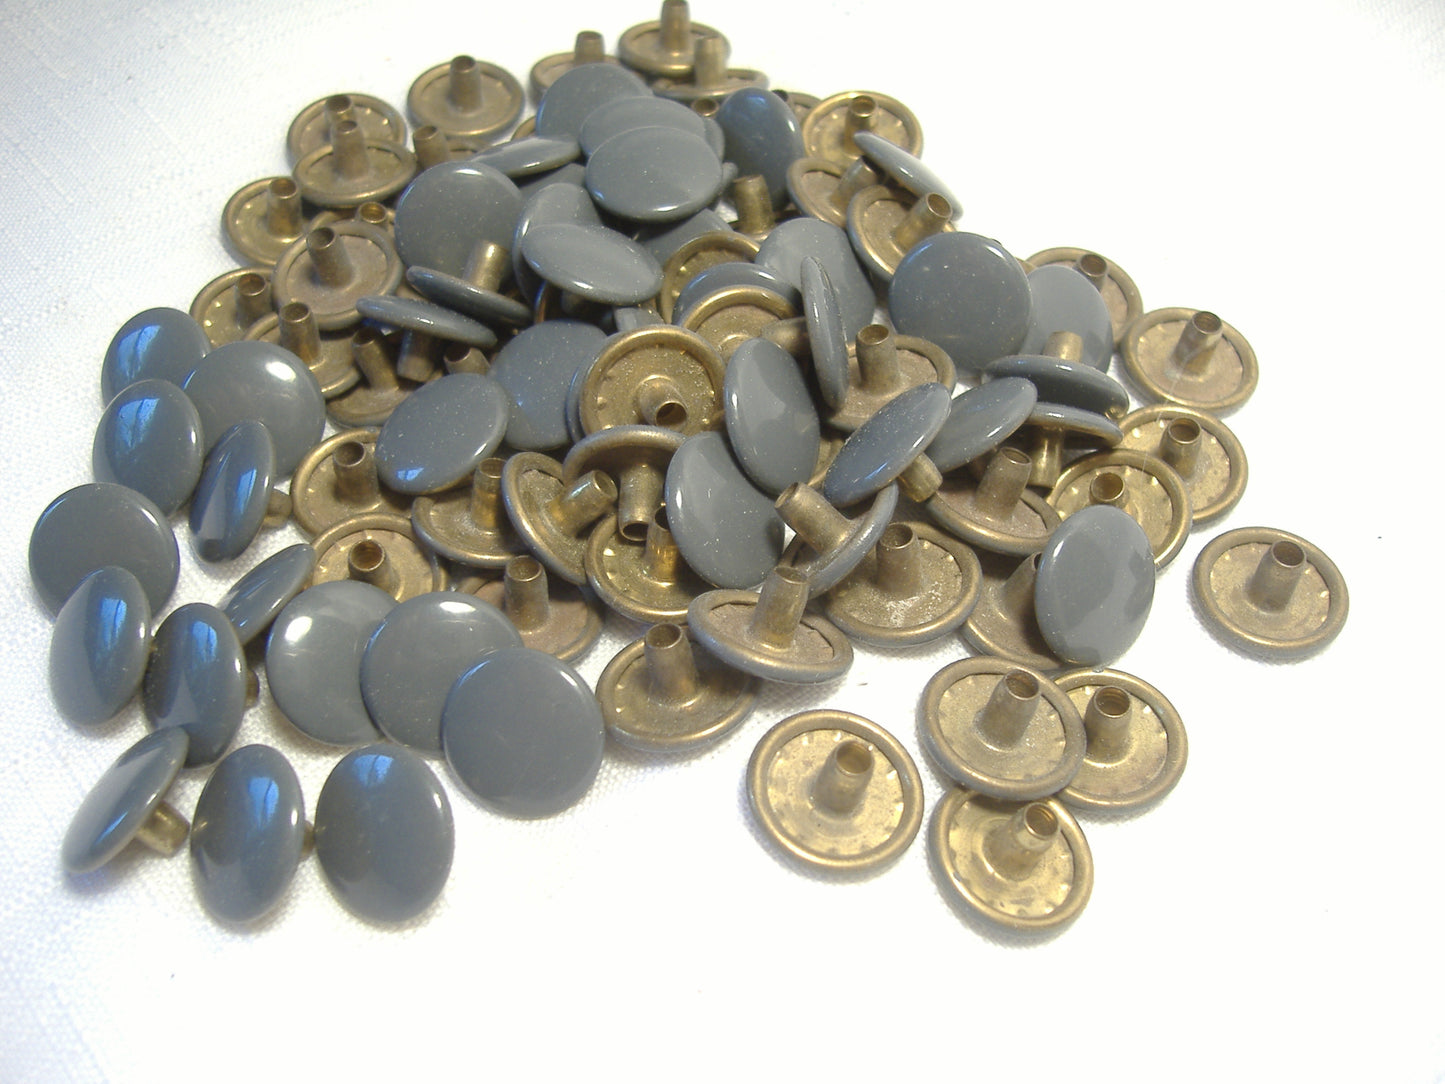 Gray Brass Snap Fastener Buttons Tonneau Cover Qty 100 Pieces OEM NOS California Sidecar